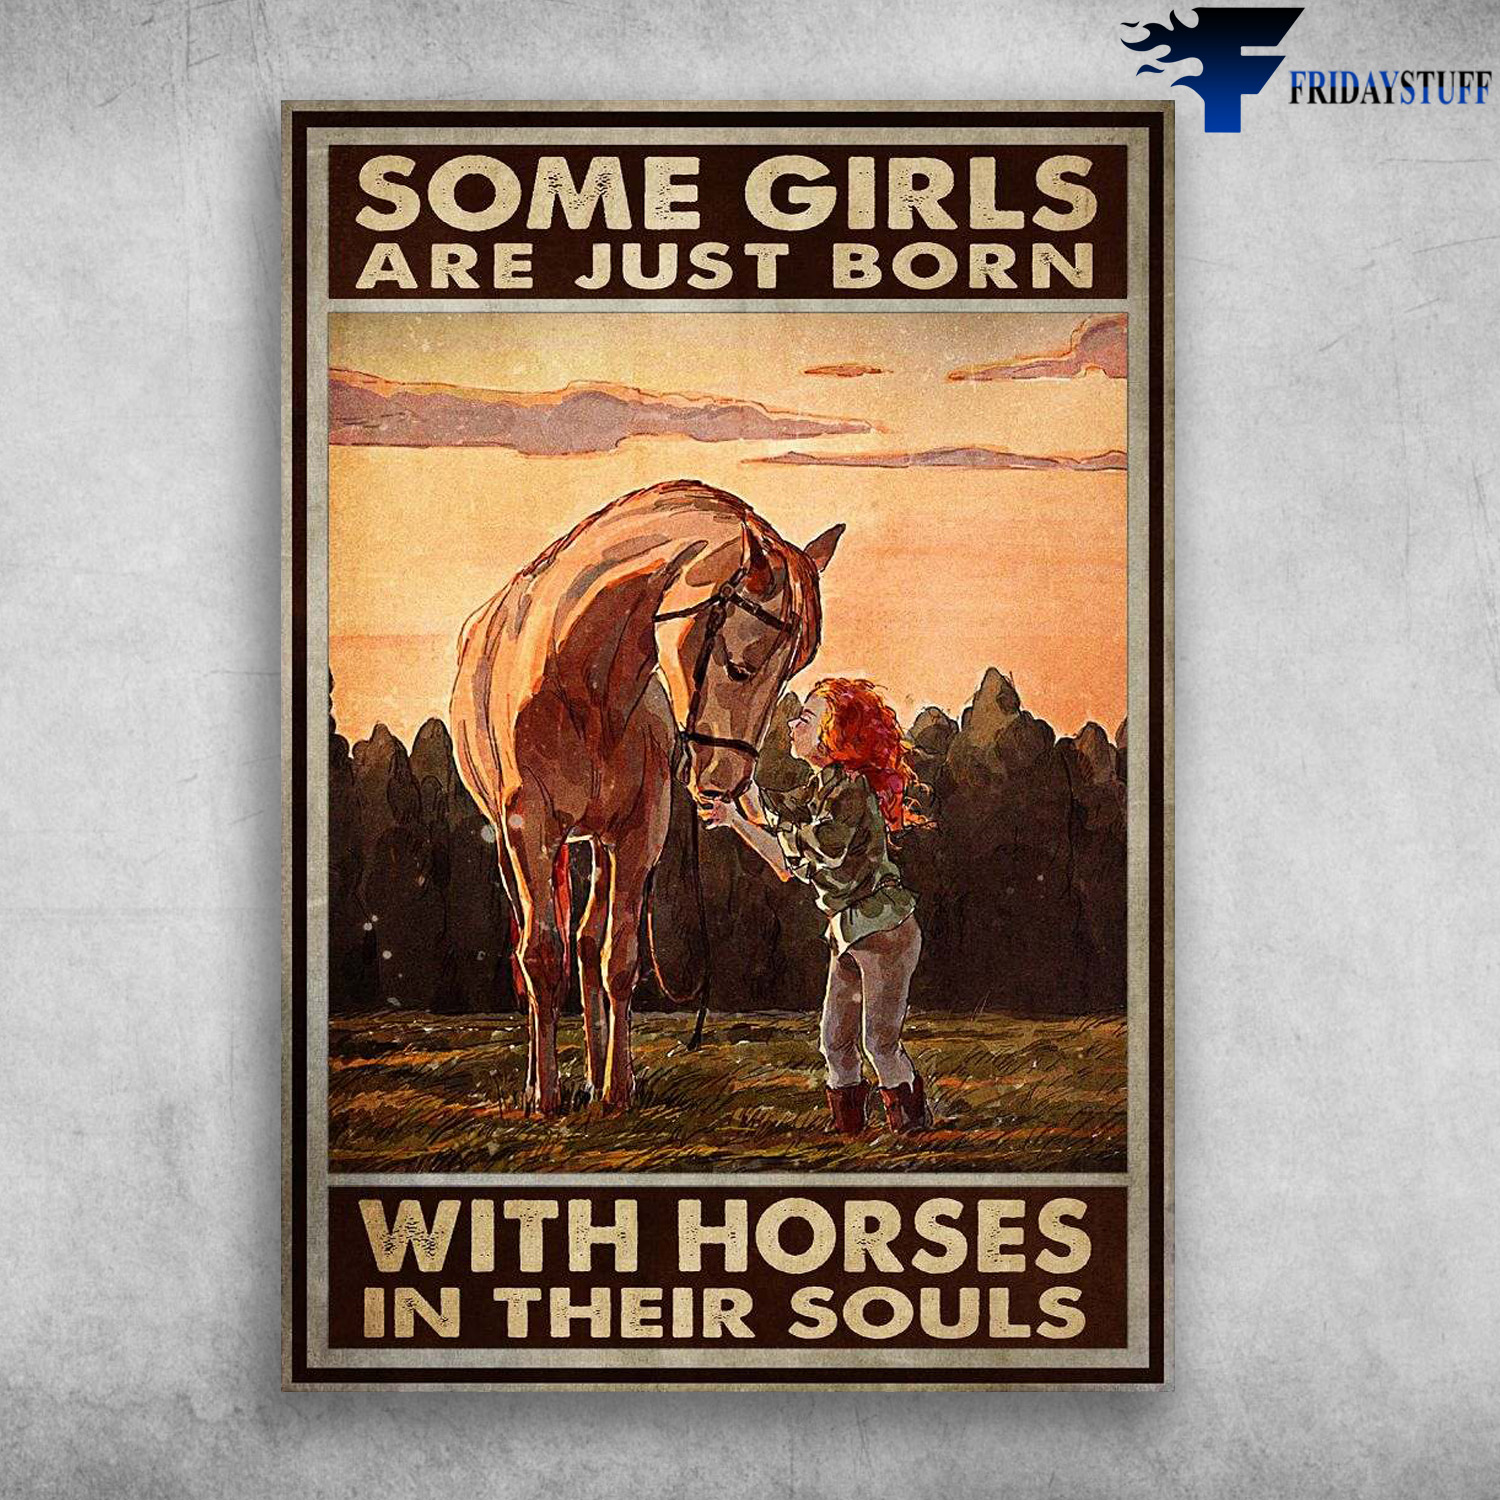 Little Girl Loves Horse - Some Girls Are Just Born, With Horses In Their Souls